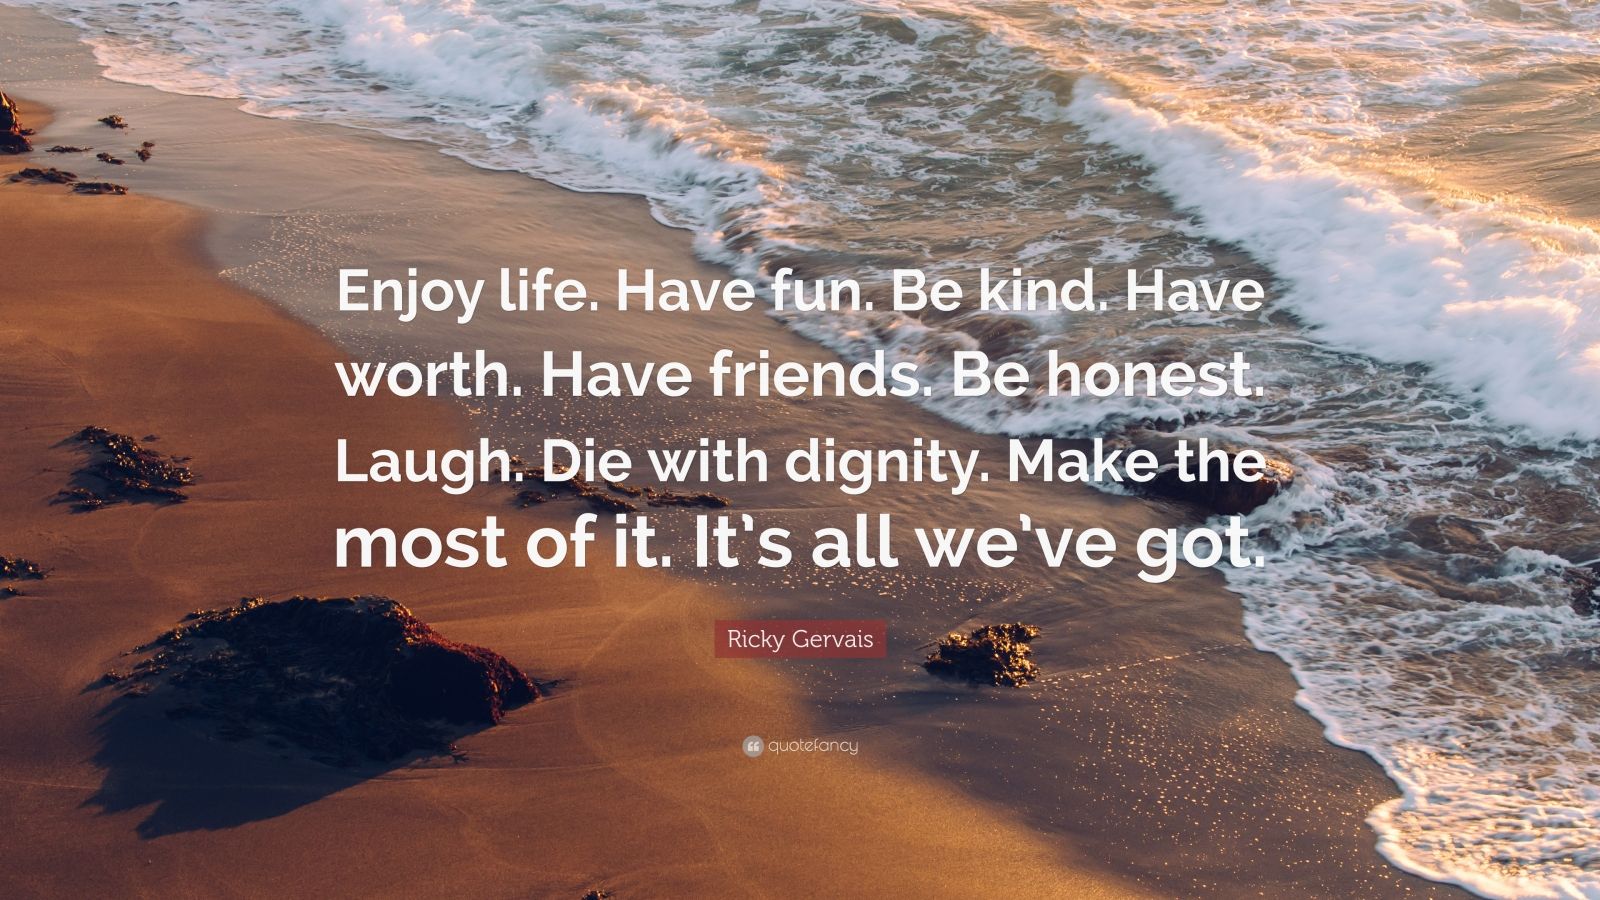 Ricky Gervais Quote: “Enjoy life. Have fun. Be kind. Have worth. Have